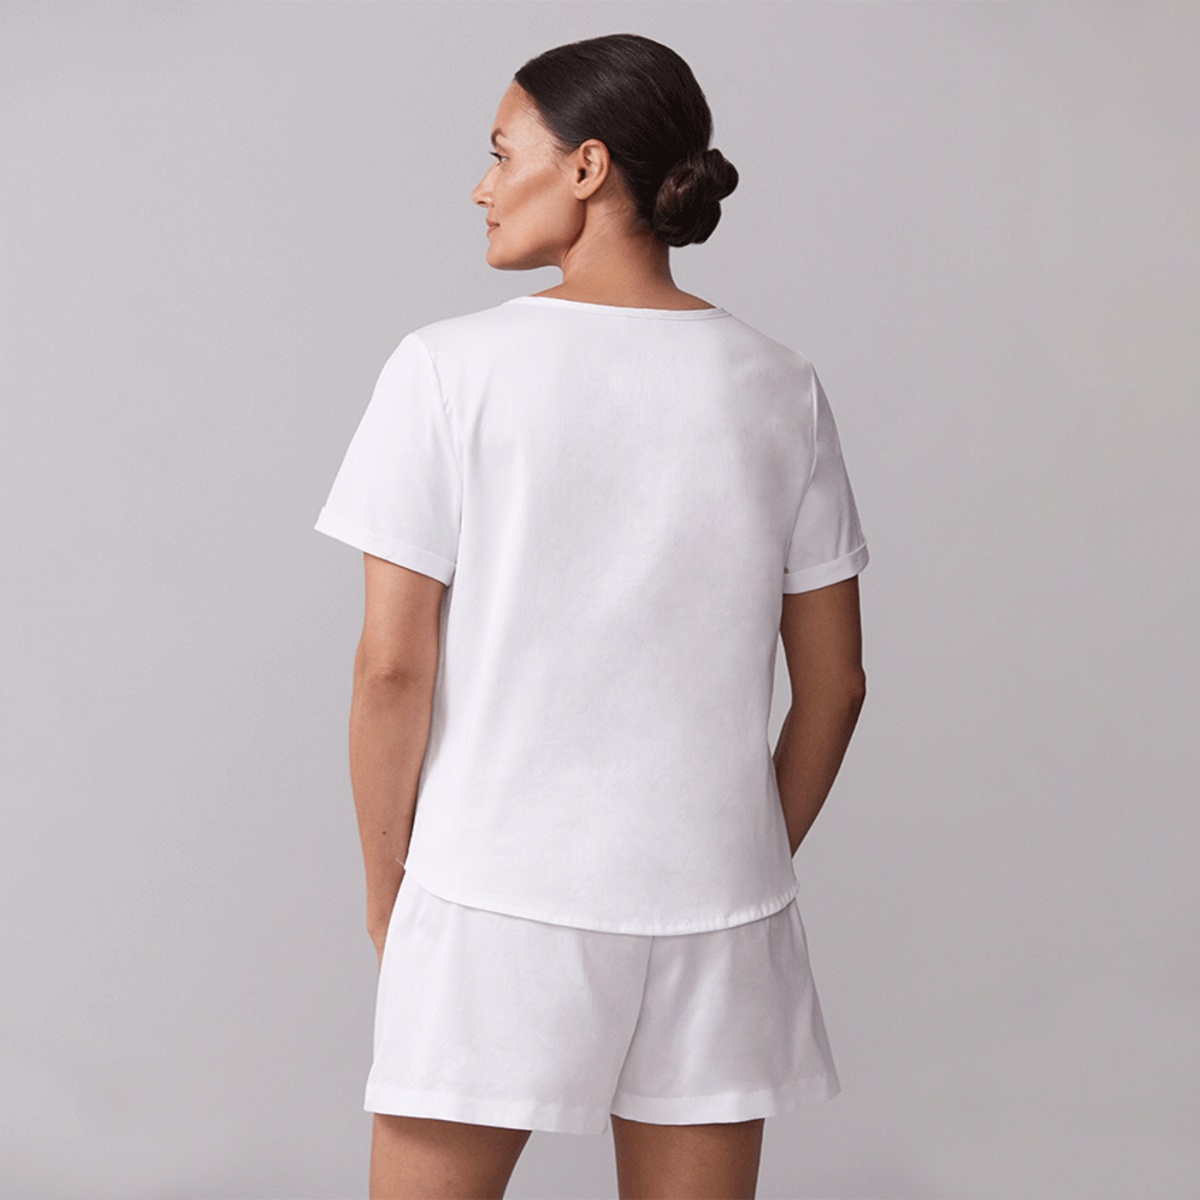 Back View of Woman Model Wearing White Sferra Caricia Short